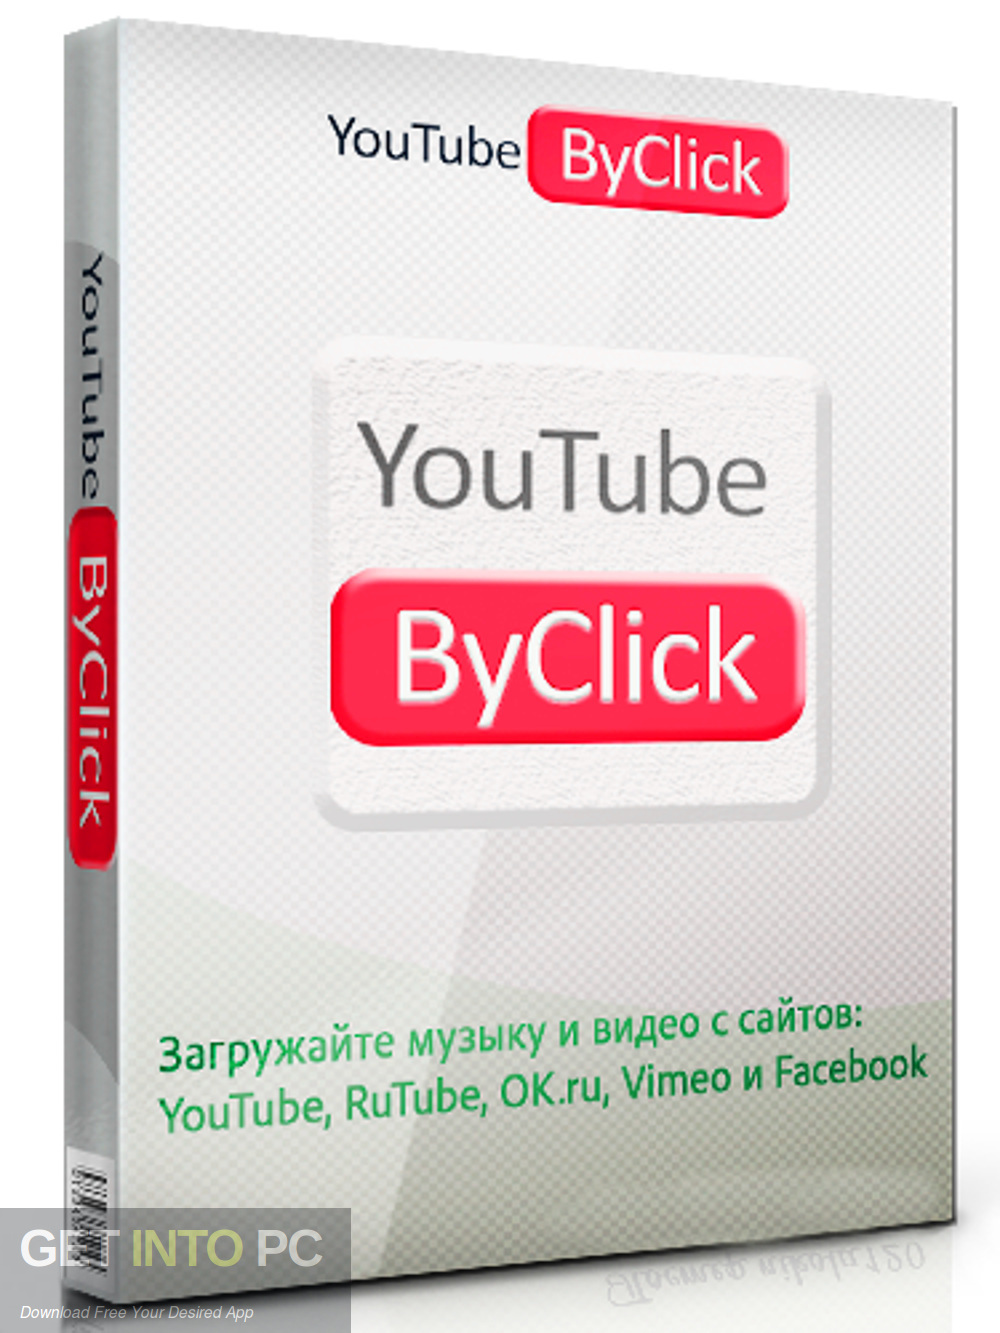 youtube by click download